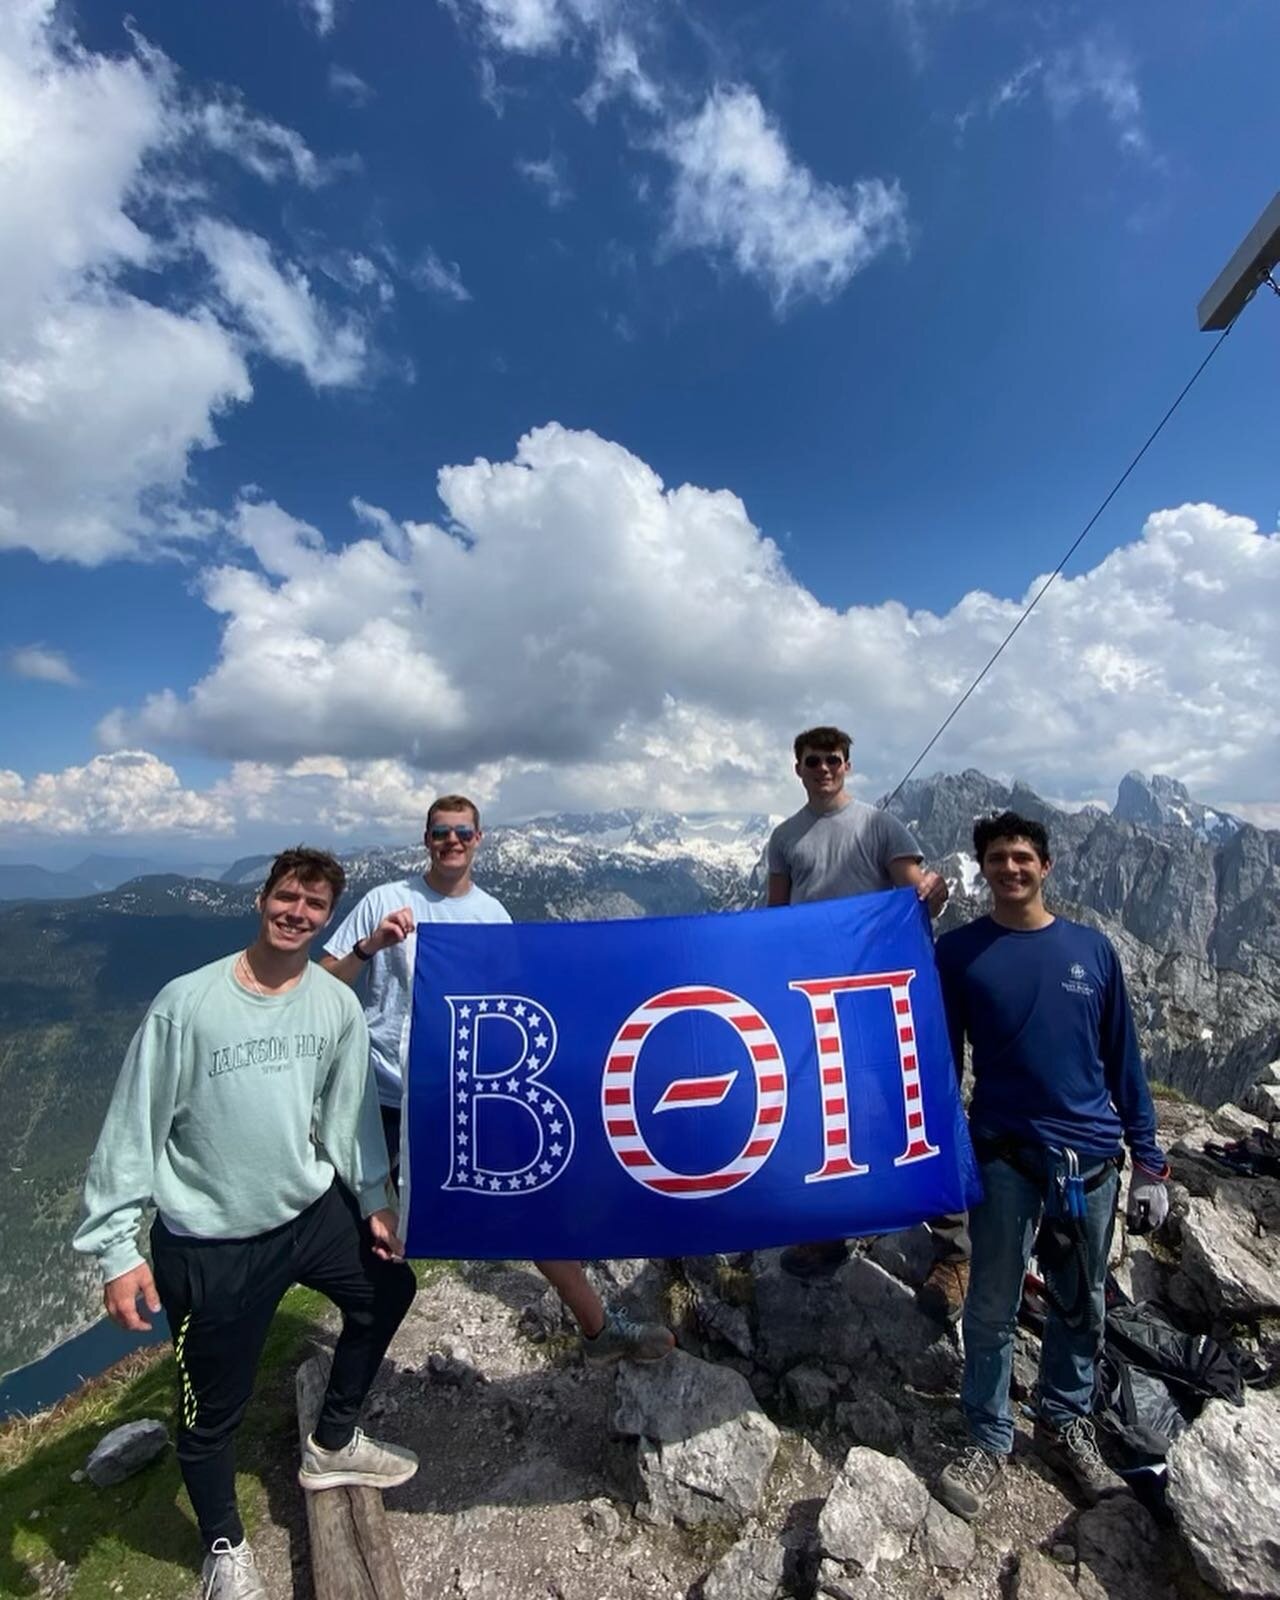 Happy 4th of July from the brothers of Beta! 🇺🇸🦅

Here&rsquo;s some highlights from earlier this summer when some of our brothers in the GT Europe study abroad program took on the Stairway to Heaven climb in Austria. Love to see the boys celebrati